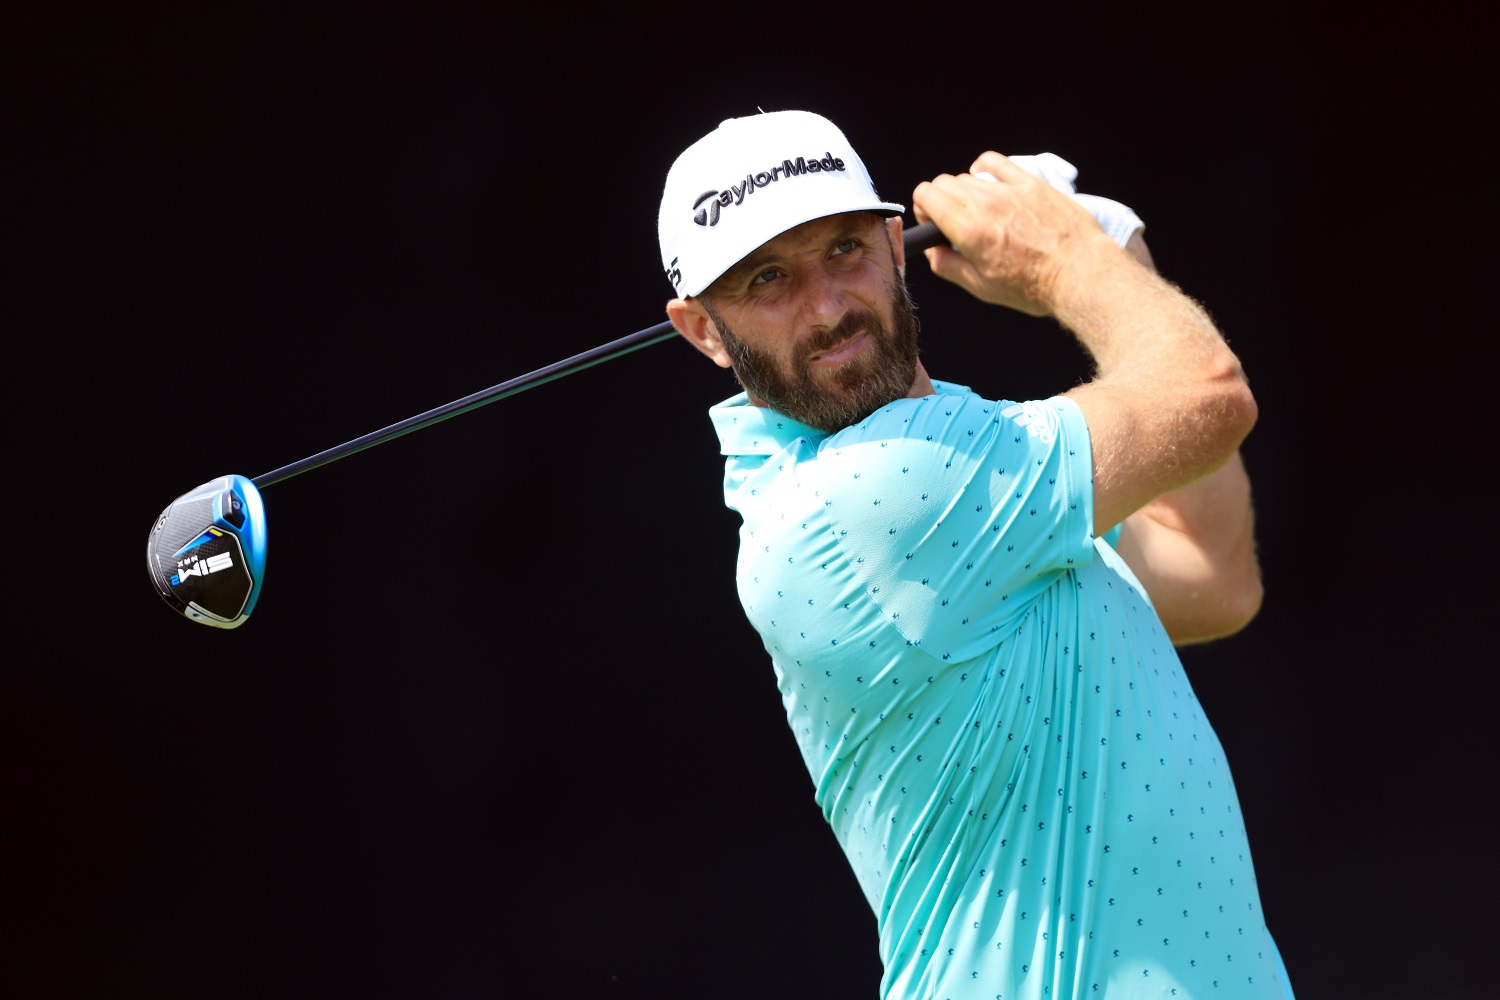 Dustin Johnson seeks to add this season's championship to the U.S. Open title he captured in 2016. | Sean M. Haffey/Getty Images